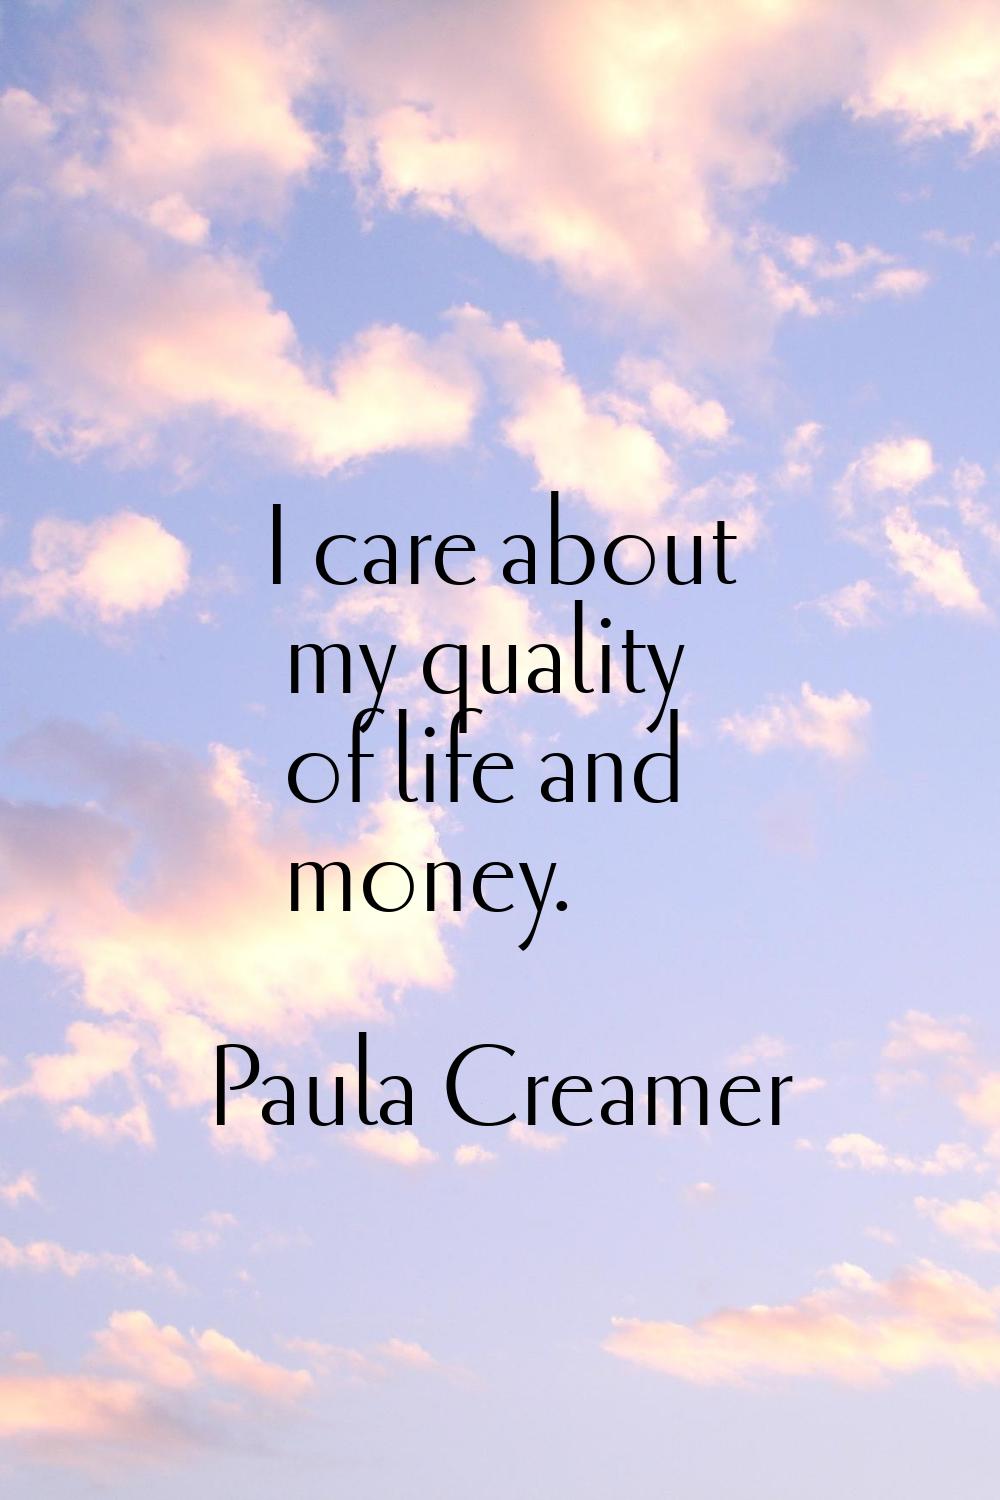 I care about my quality of life and money.